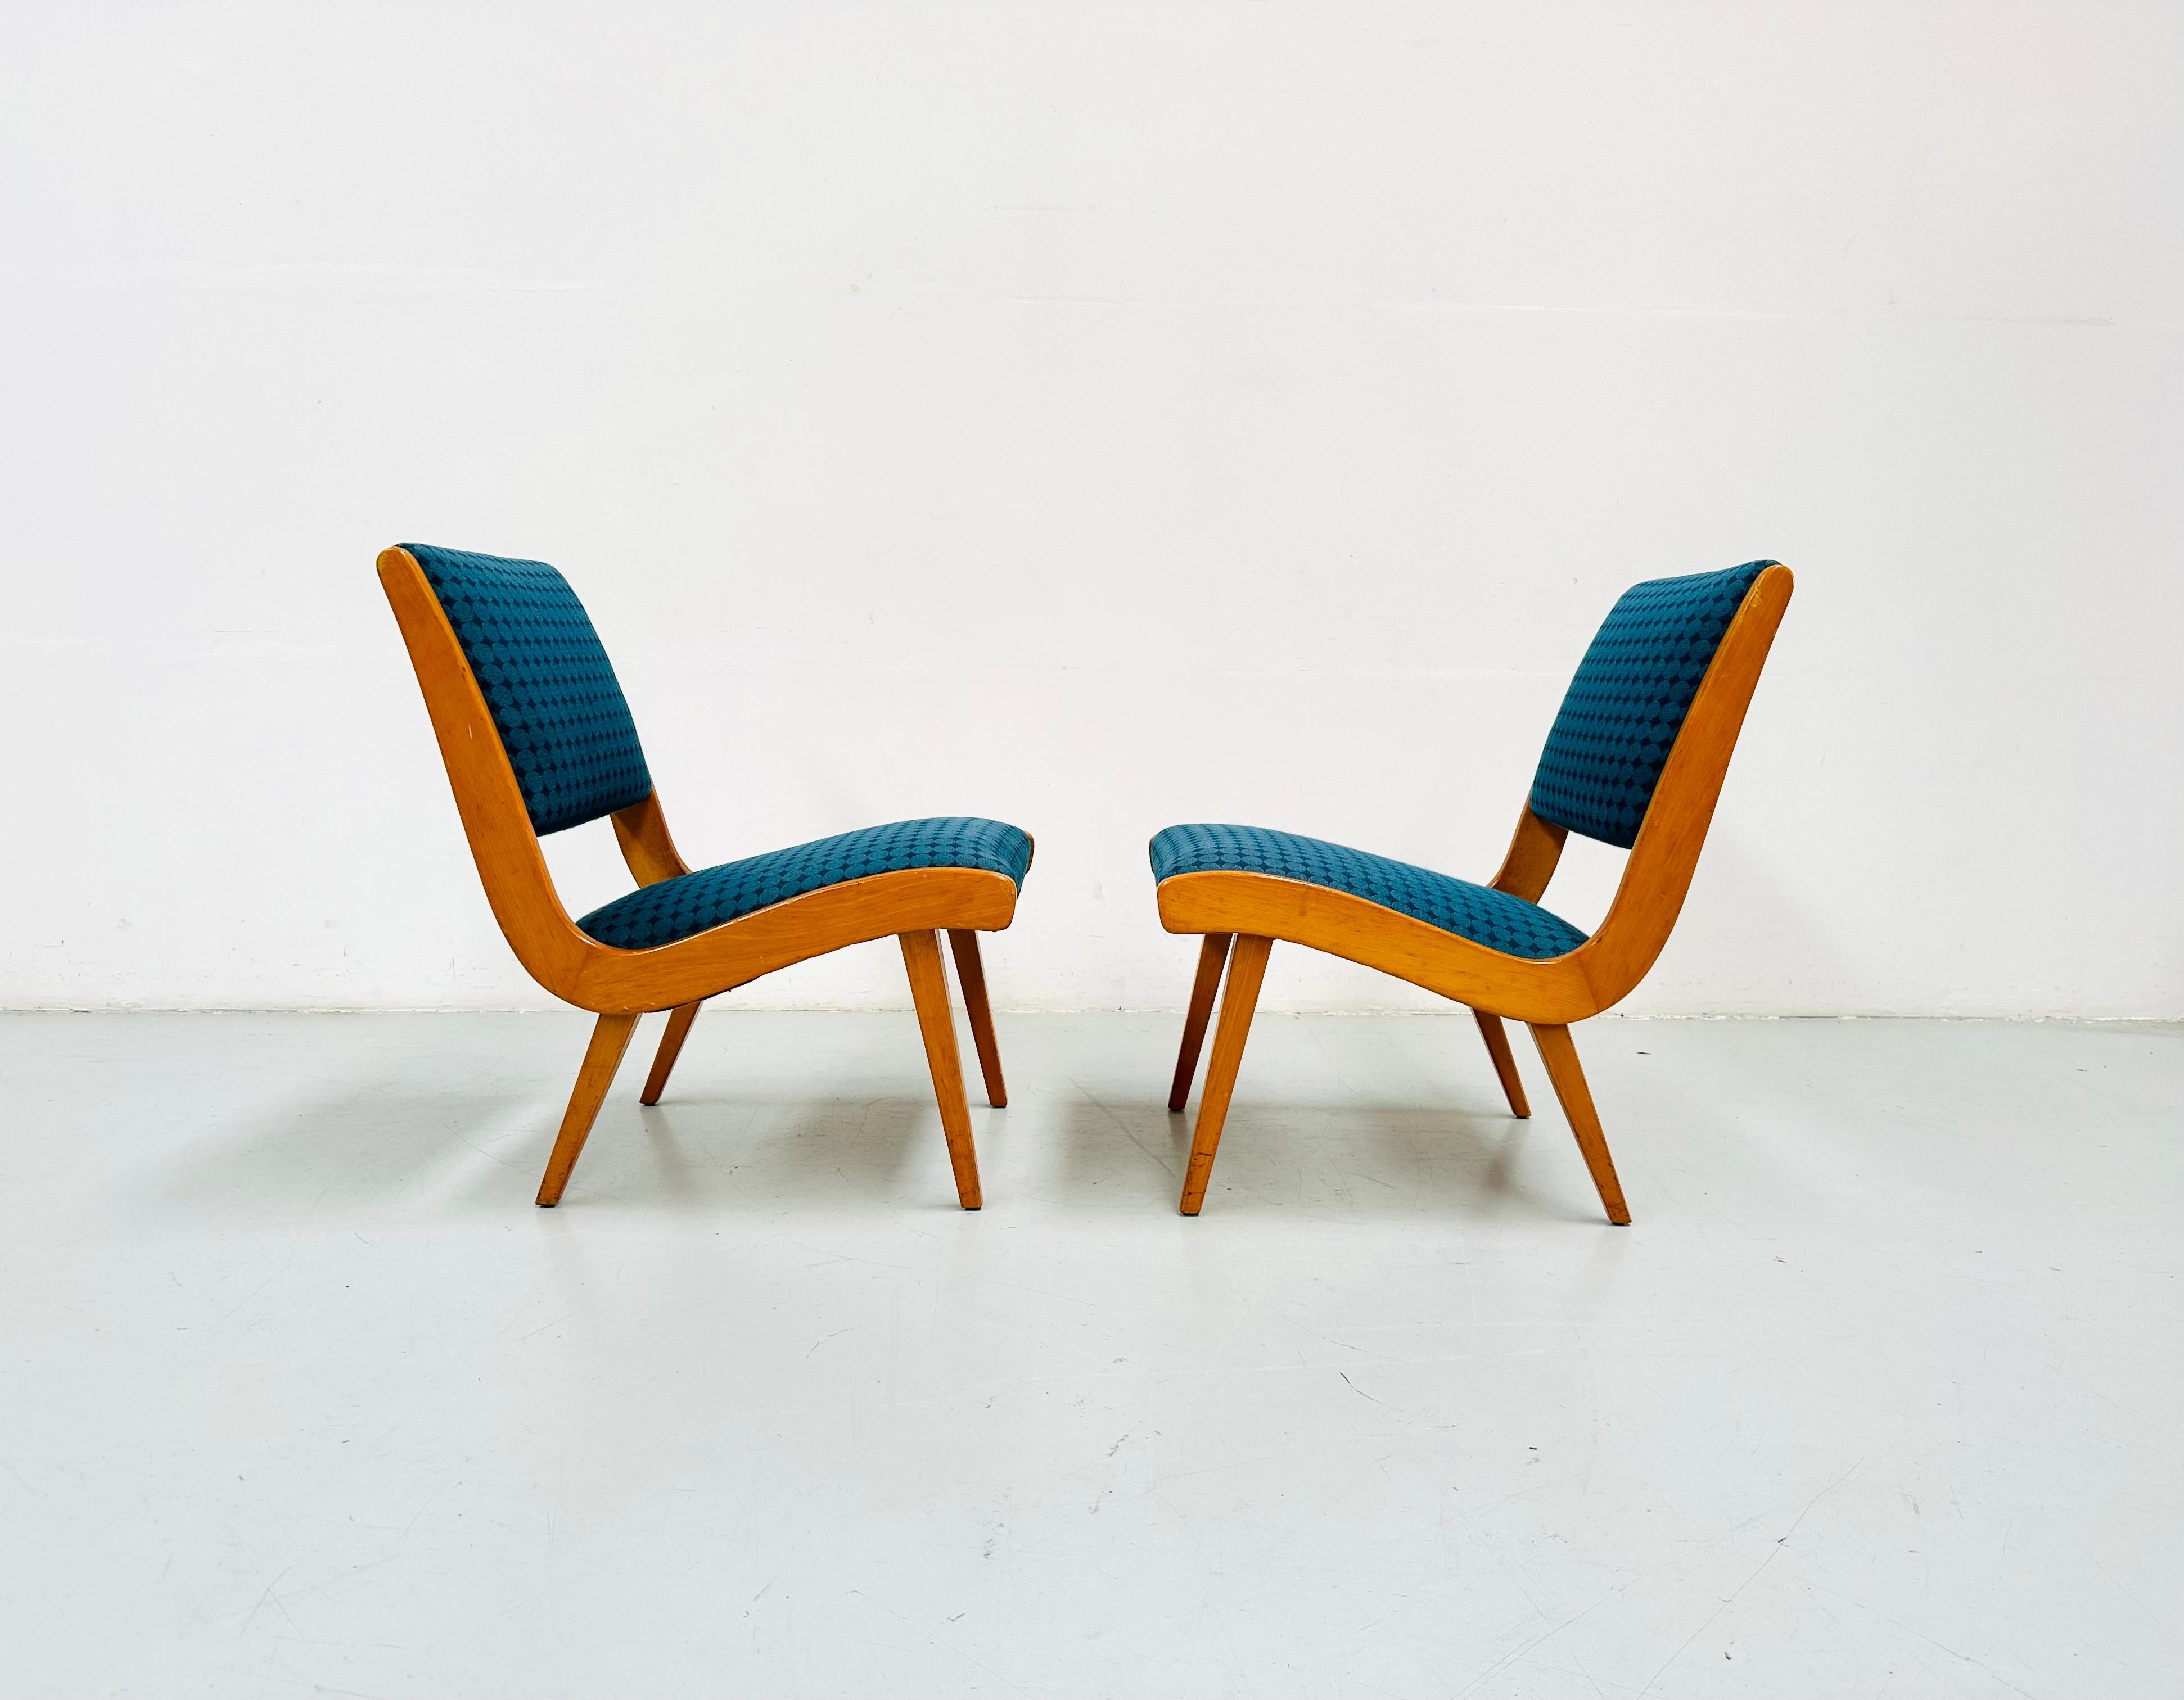 Mid-Century Modern 1950s Rare Set Vostra Chairs Numbered & Original Fabric by Jens Risom for Knoll. For Sale